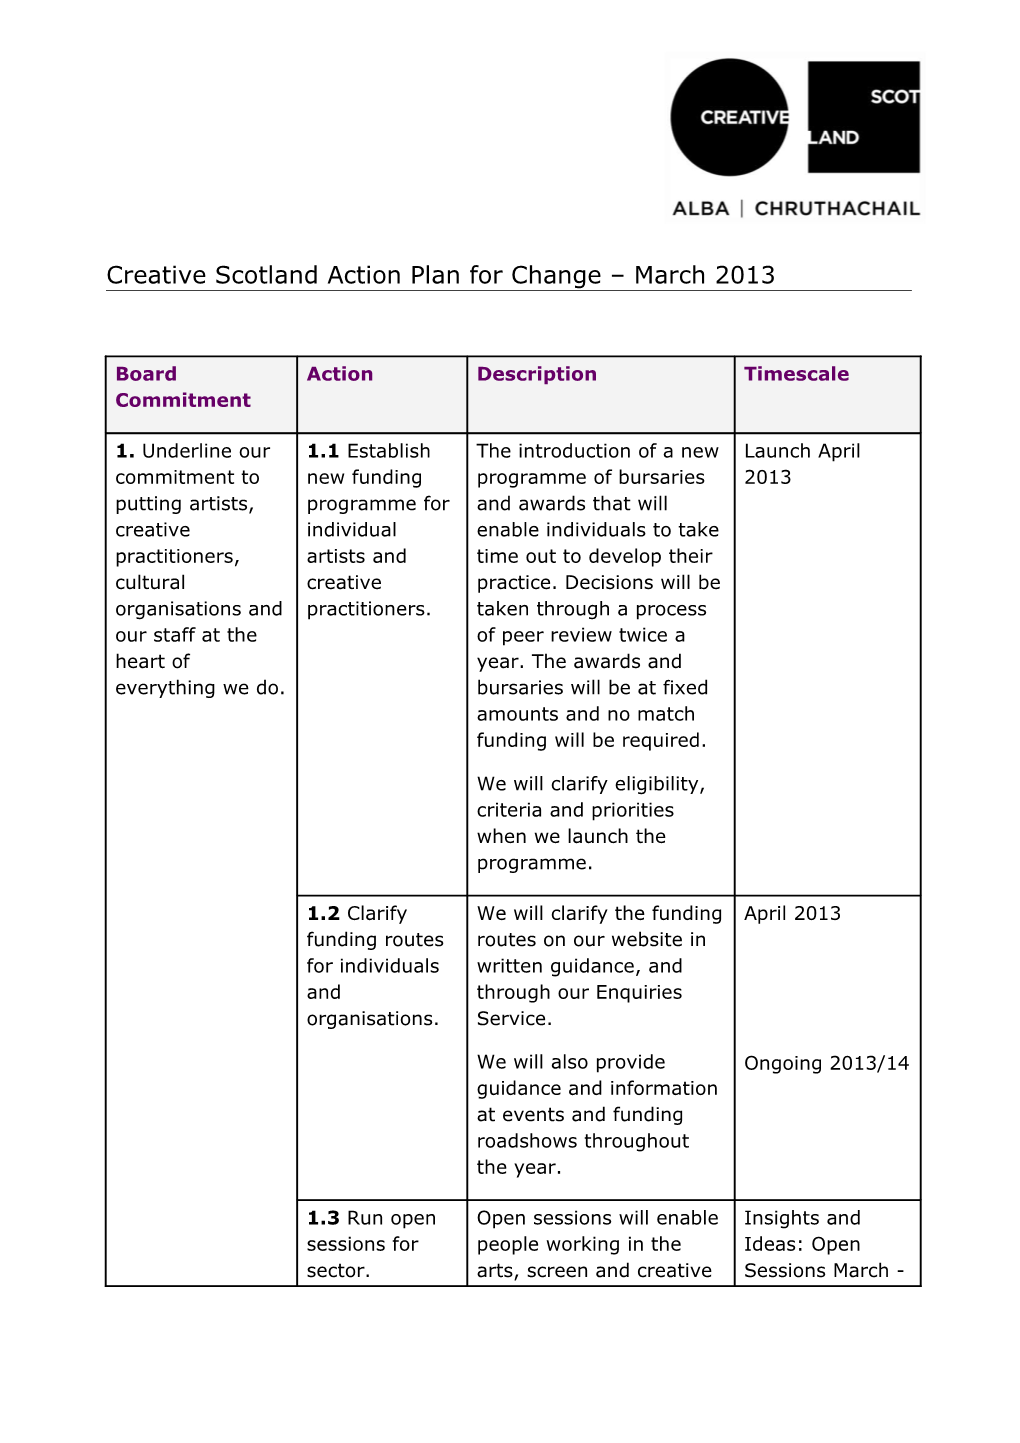 Creative Scotland Action Plan for Change March 2013